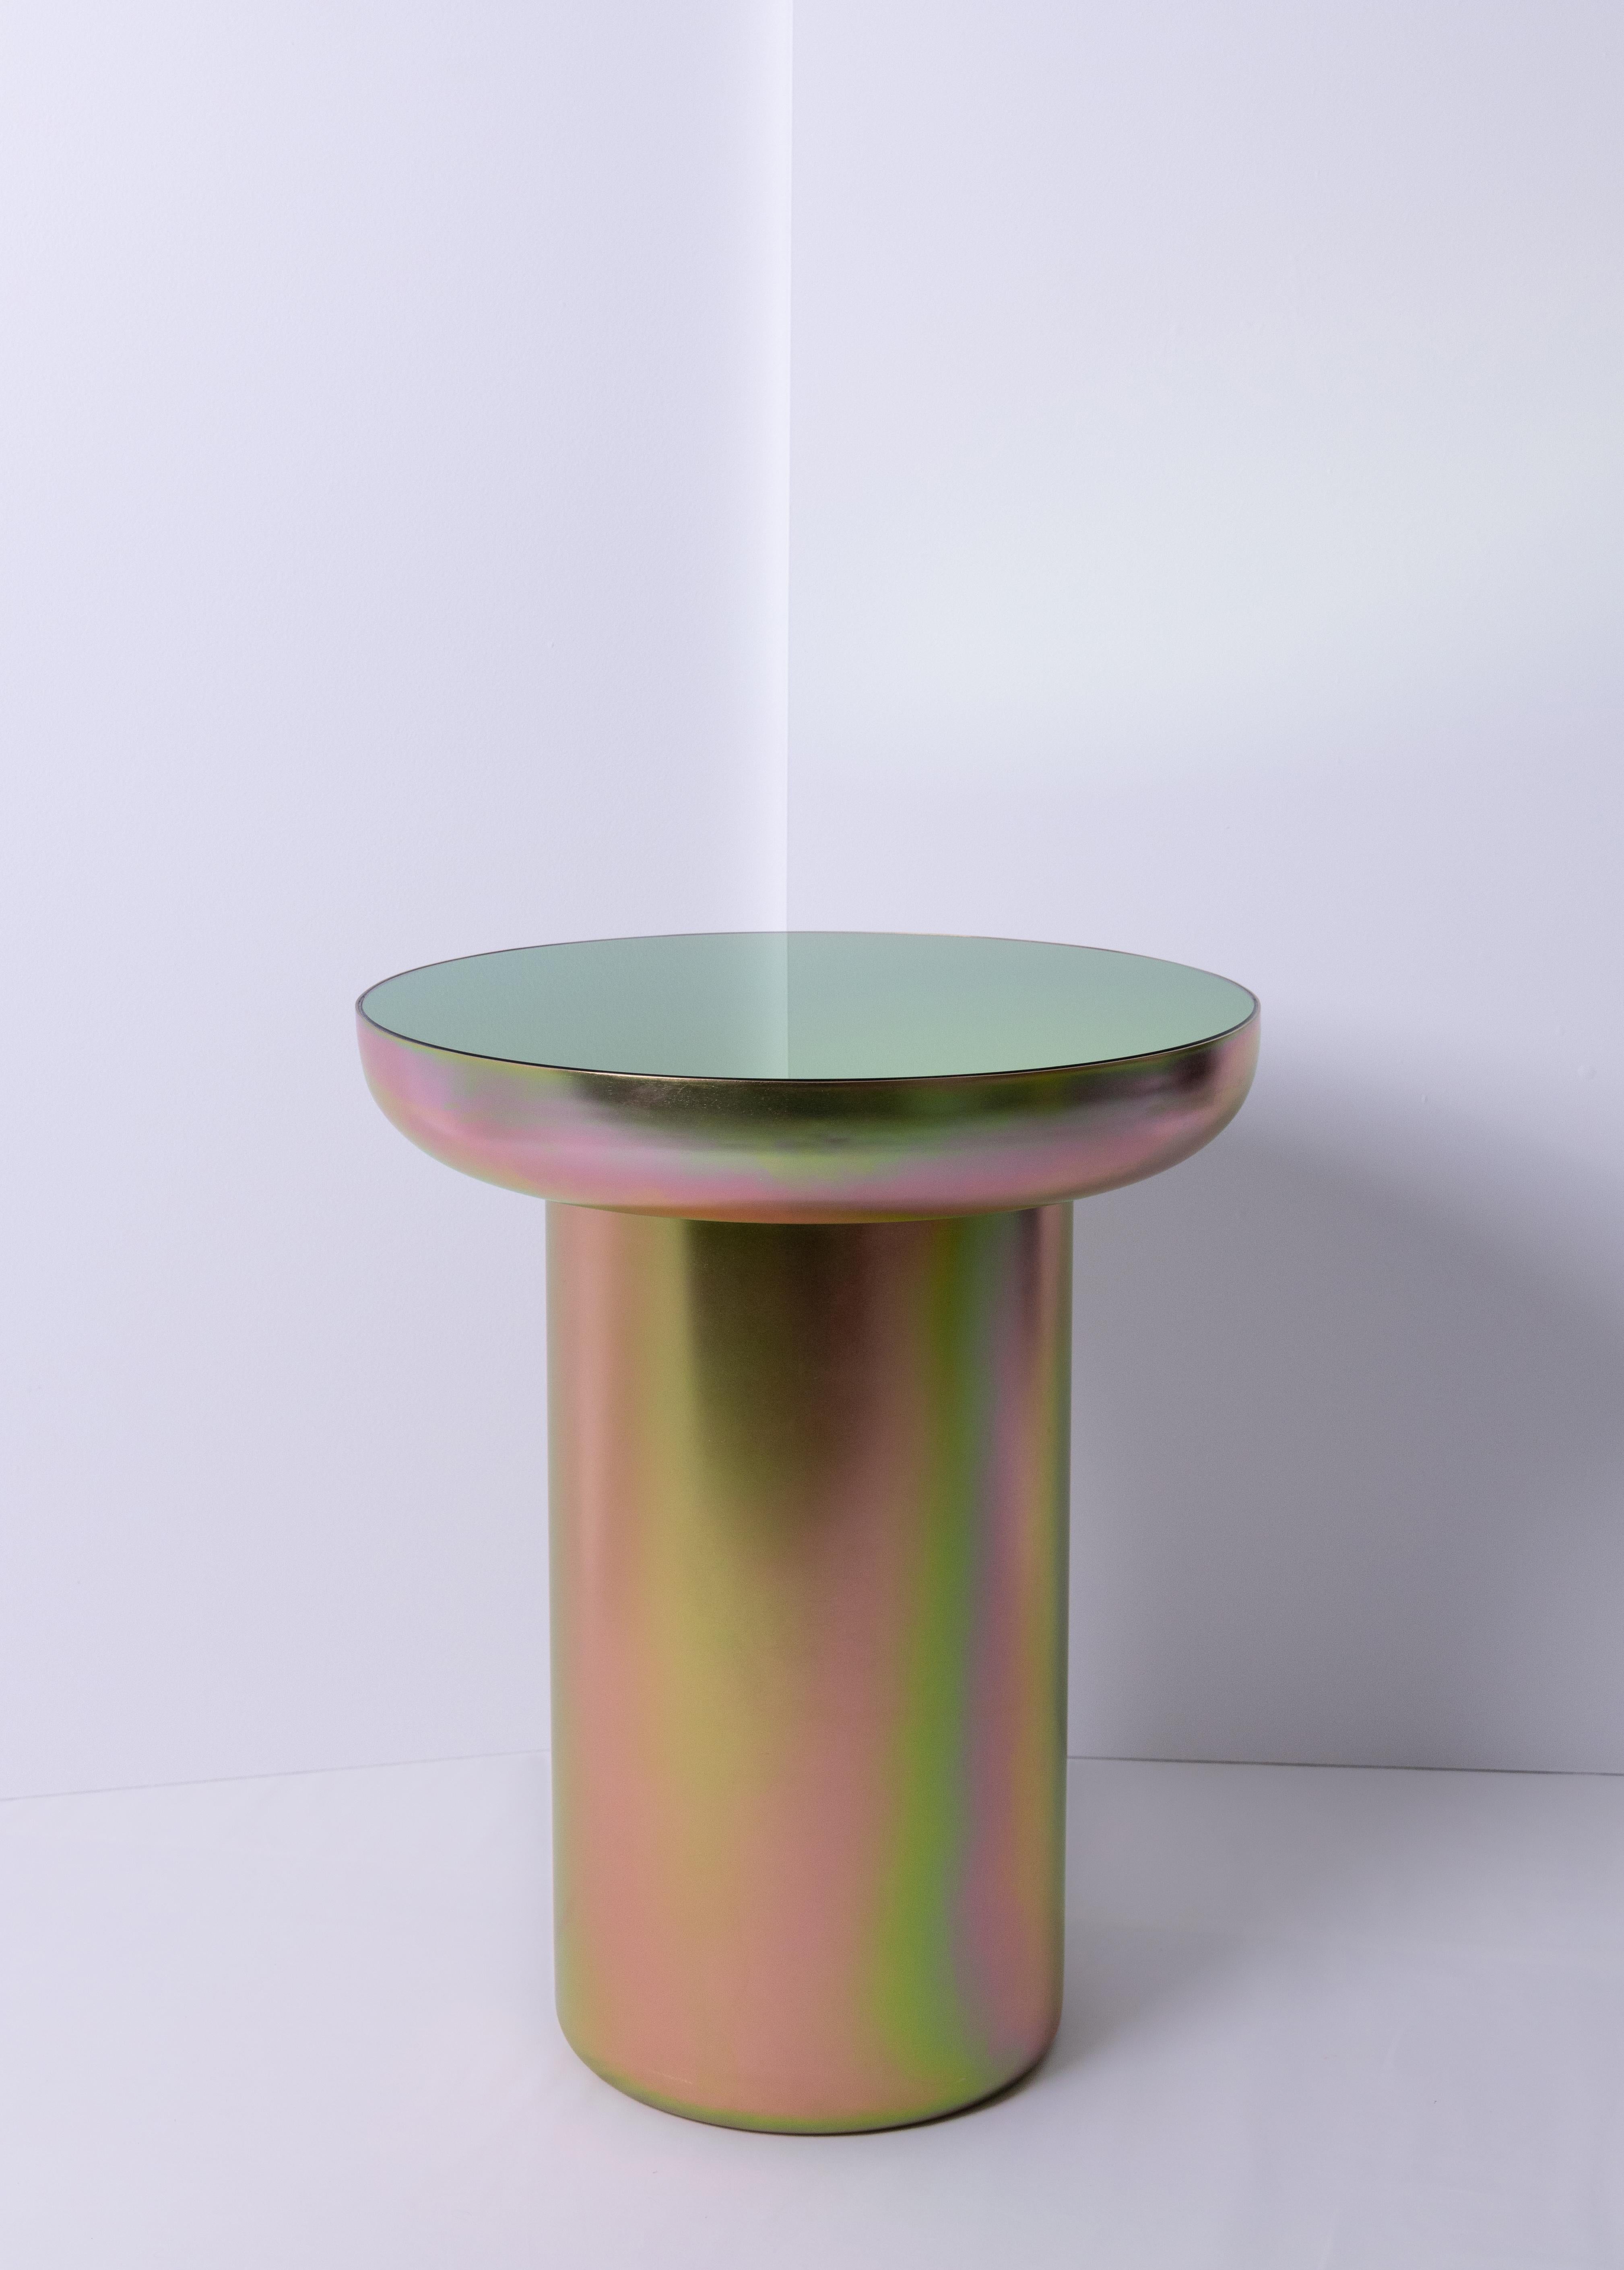 Mood side zinc is a visually light sculpturally strong table coated in a finish that elevates form and celebrates color. The base is plated in a Zinc coating, a performative finish which allows the piece to reflect the colors and tones of its